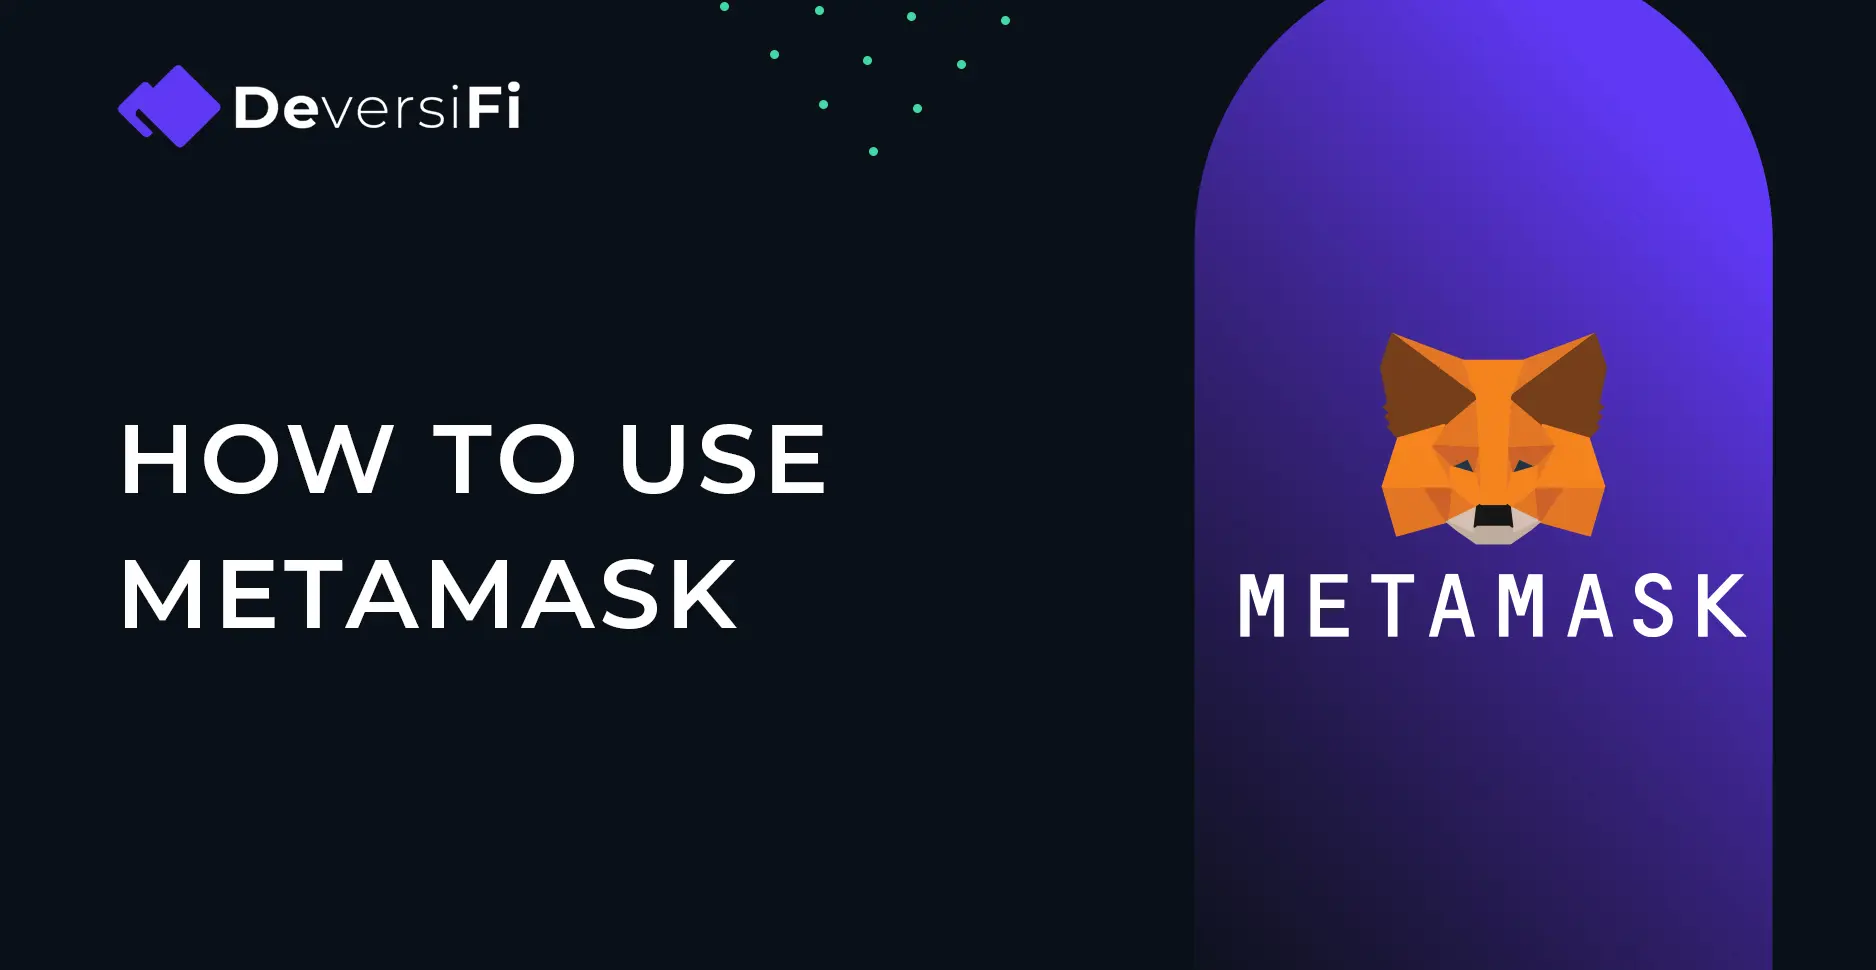 A Step-by-Step Guide to Downloading and Installing MetaMask